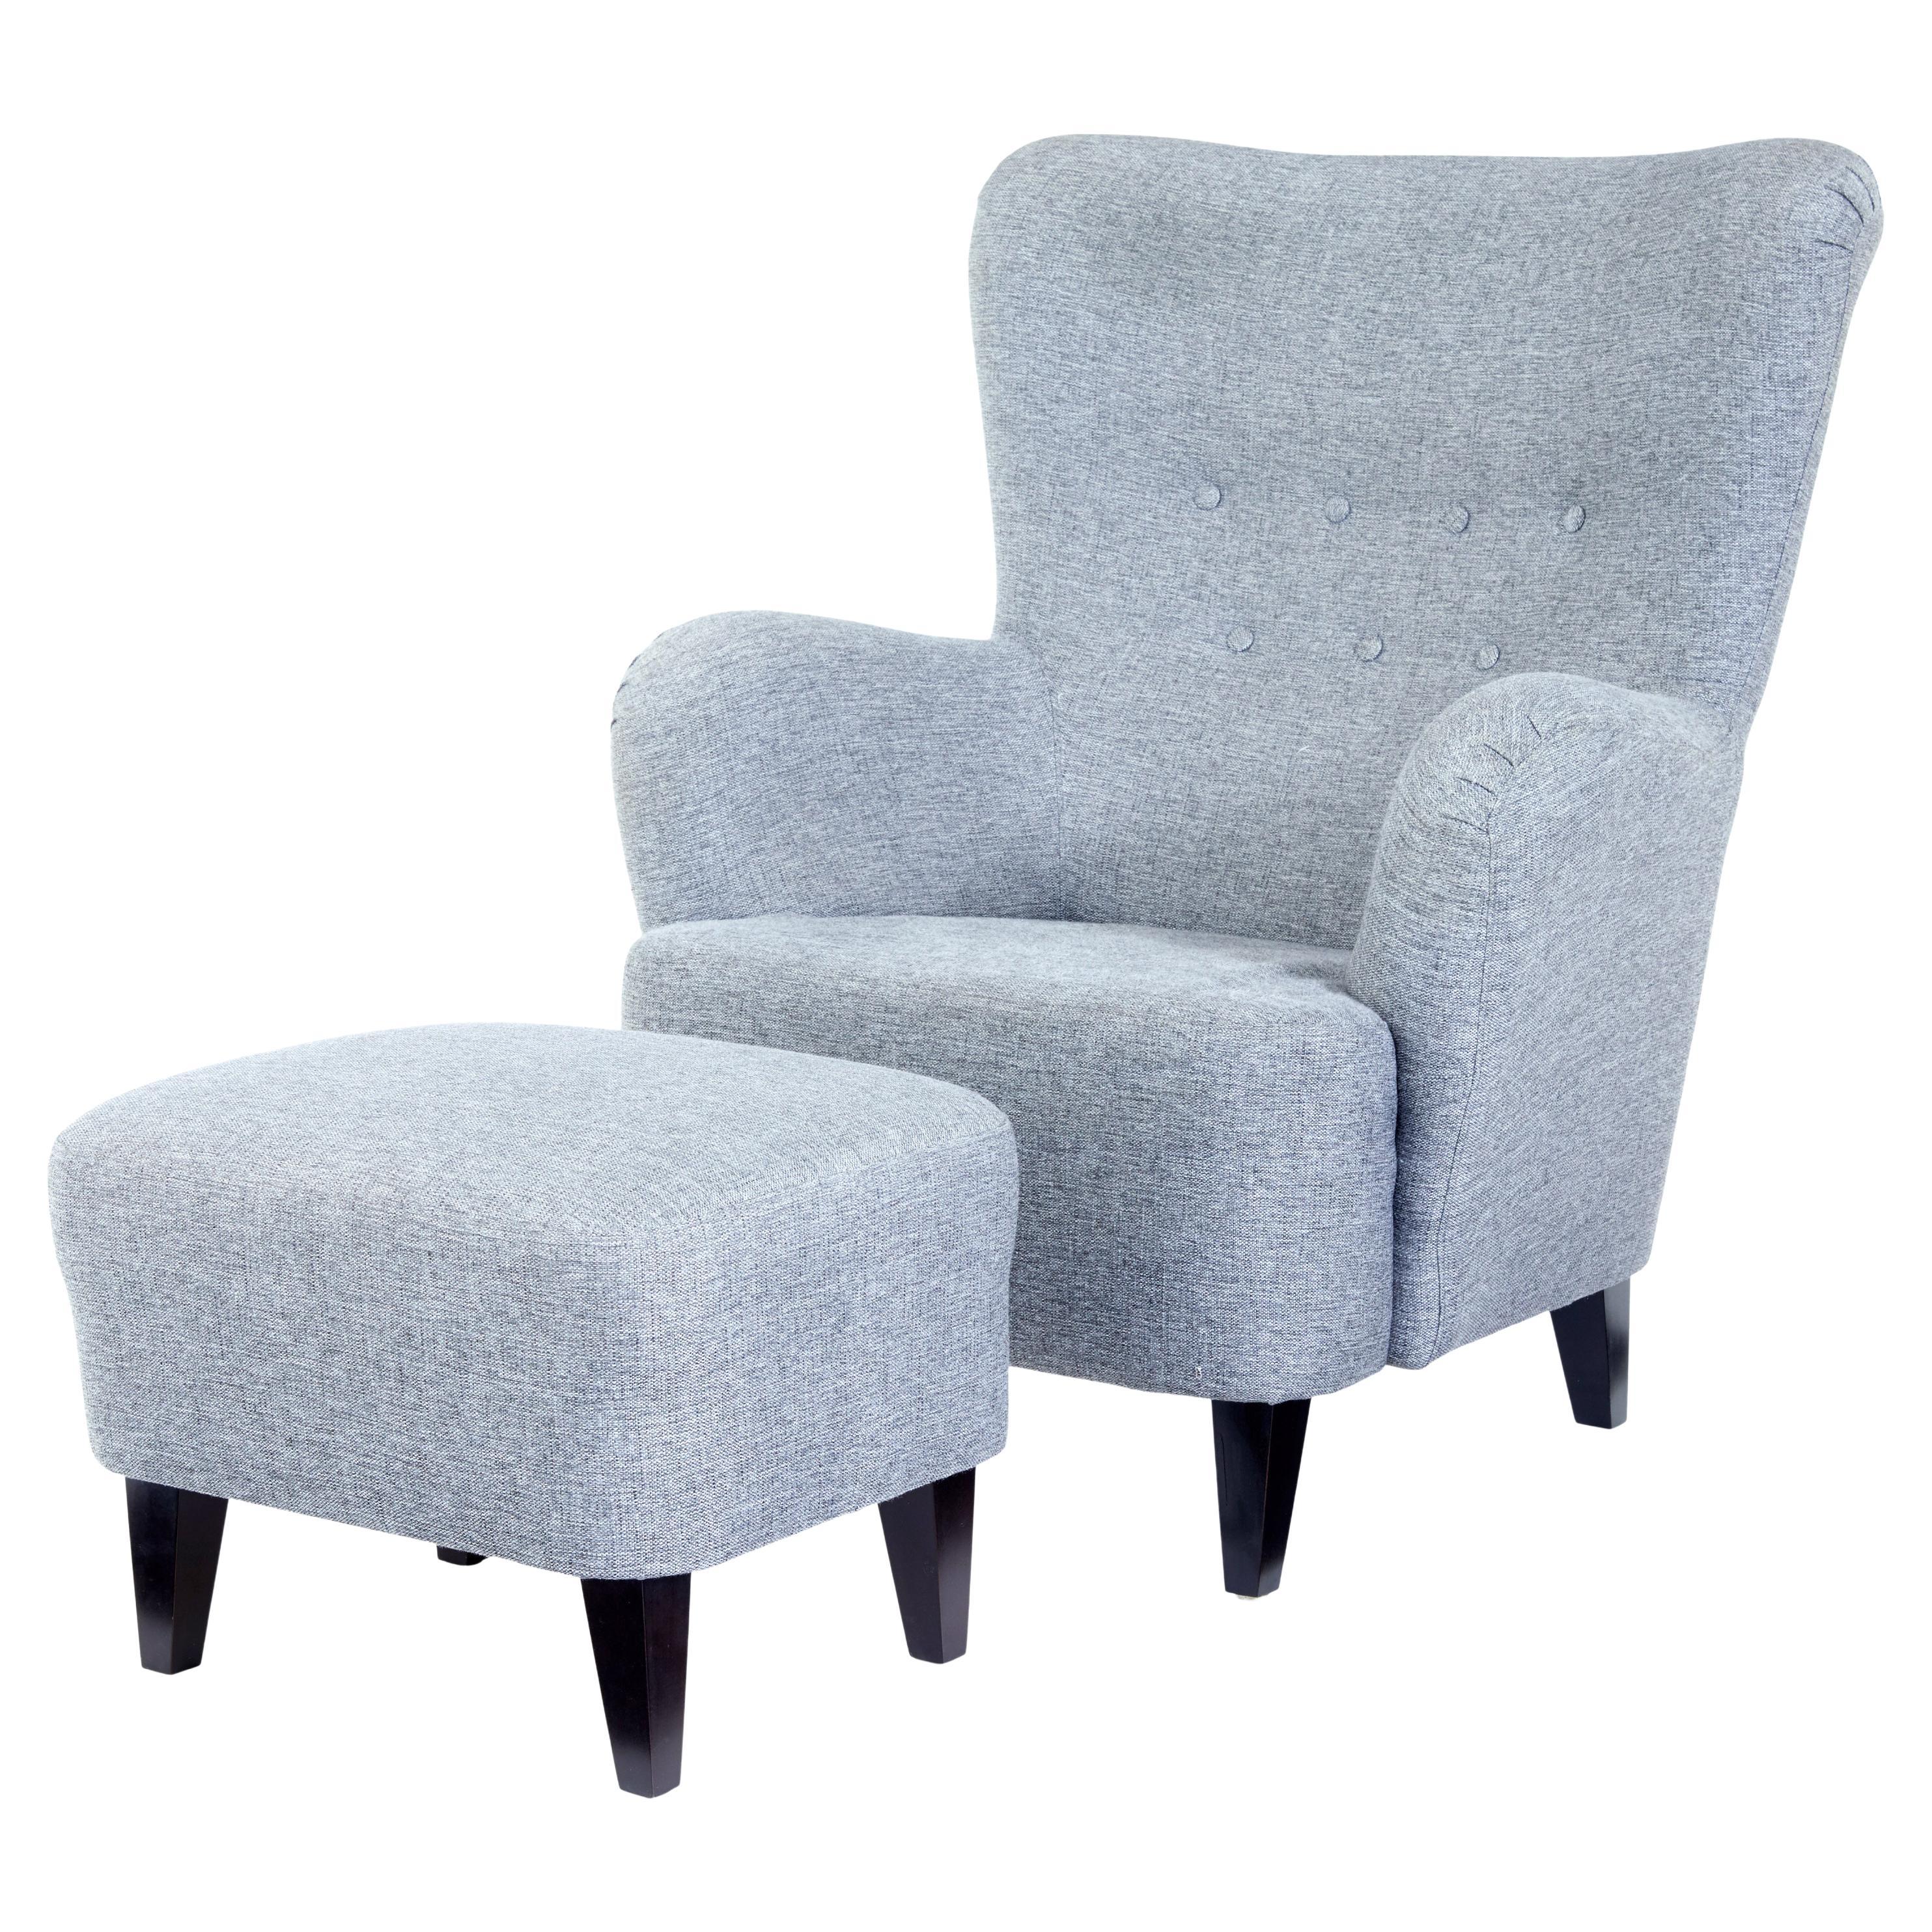 Contemporary Scandinavian Grace Armchair with Stool For Sale at 1stDibs